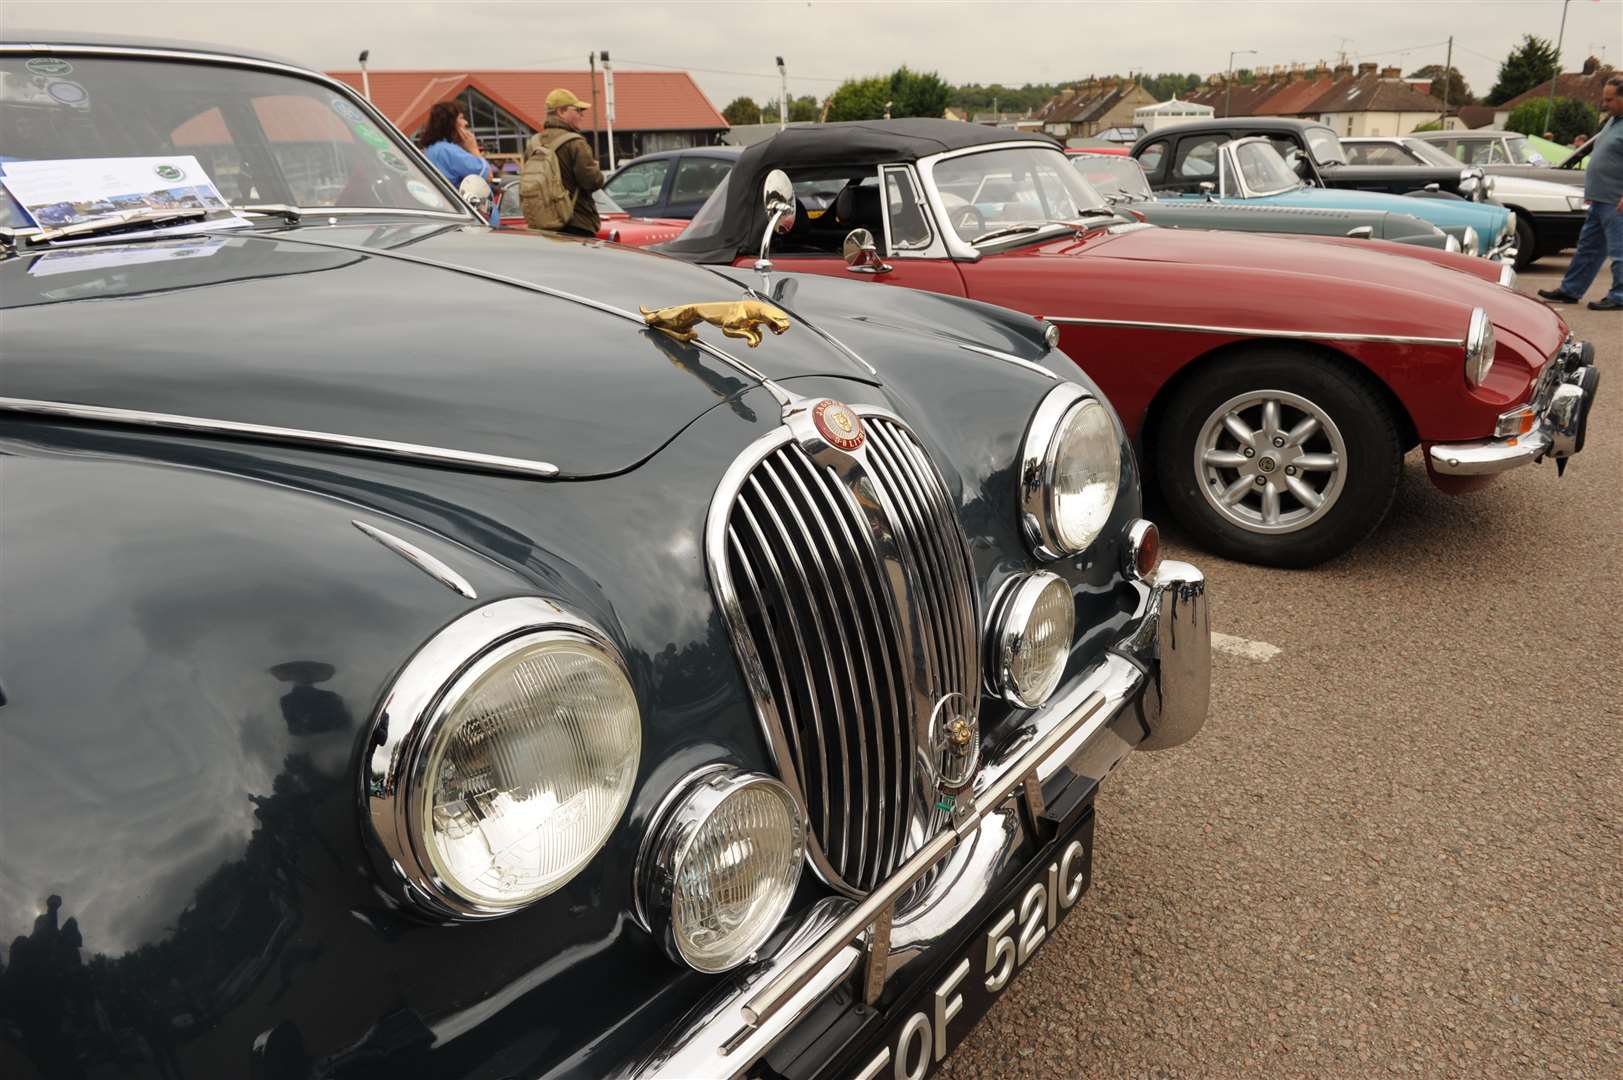 Book your ticket to look at the classic cars in Hawley